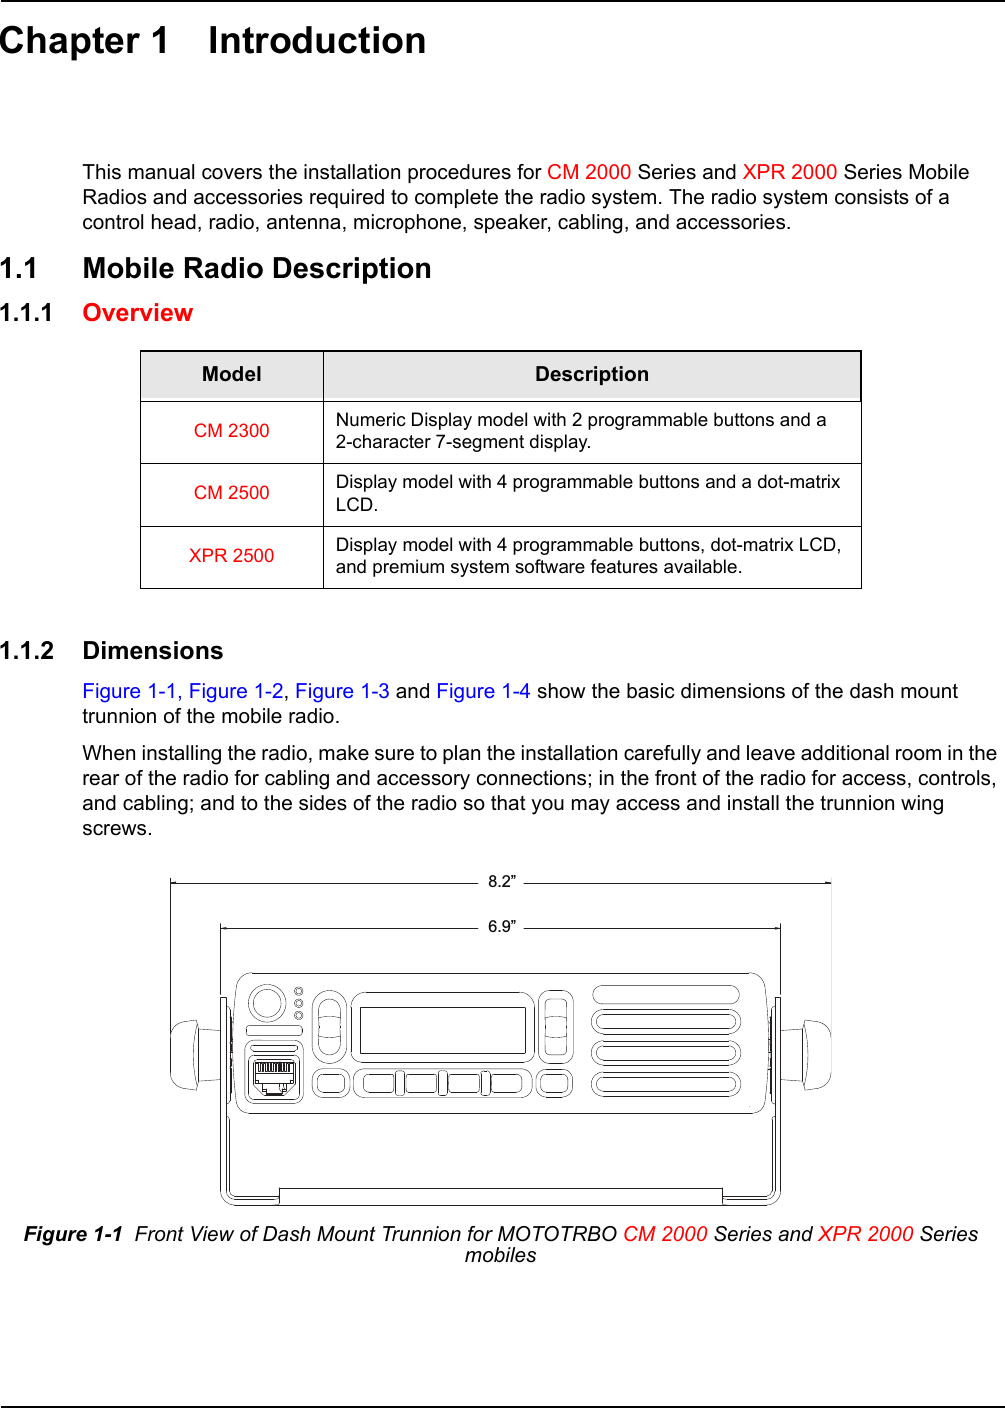 Chapter 1 IntroductionThis manual covers the installation procedures for CM 2000 Series and XPR 2000 Series Mobile Radios and accessories required to complete the radio system. The radio system consists of a control head, radio, antenna, microphone, speaker, cabling, and accessories. 1.1 Mobile Radio Description1.1.1 Overview 1.1.2 DimensionsFigure 1-1, Figure 1-2, Figure 1-3 and Figure 1-4 show the basic dimensions of the dash mount trunnion of the mobile radio.When installing the radio, make sure to plan the installation carefully and leave additional room in the rear of the radio for cabling and accessory connections; in the front of the radio for access, controls, and cabling; and to the sides of the radio so that you may access and install the trunnion wing screws.Model DescriptionCM 2300 Numeric Display model with 2 programmable buttons and a  2-character 7-segment display.CM 2500 Display model with 4 programmable buttons and a dot-matrix LCD.XPR 2500 Display model with 4 programmable buttons, dot-matrix LCD, and premium system software features available.Figure 1-1  Front View of Dash Mount Trunnion for MOTOTRBO CM 2000 Series and XPR 2000 Series mobiles8.2”6.9”